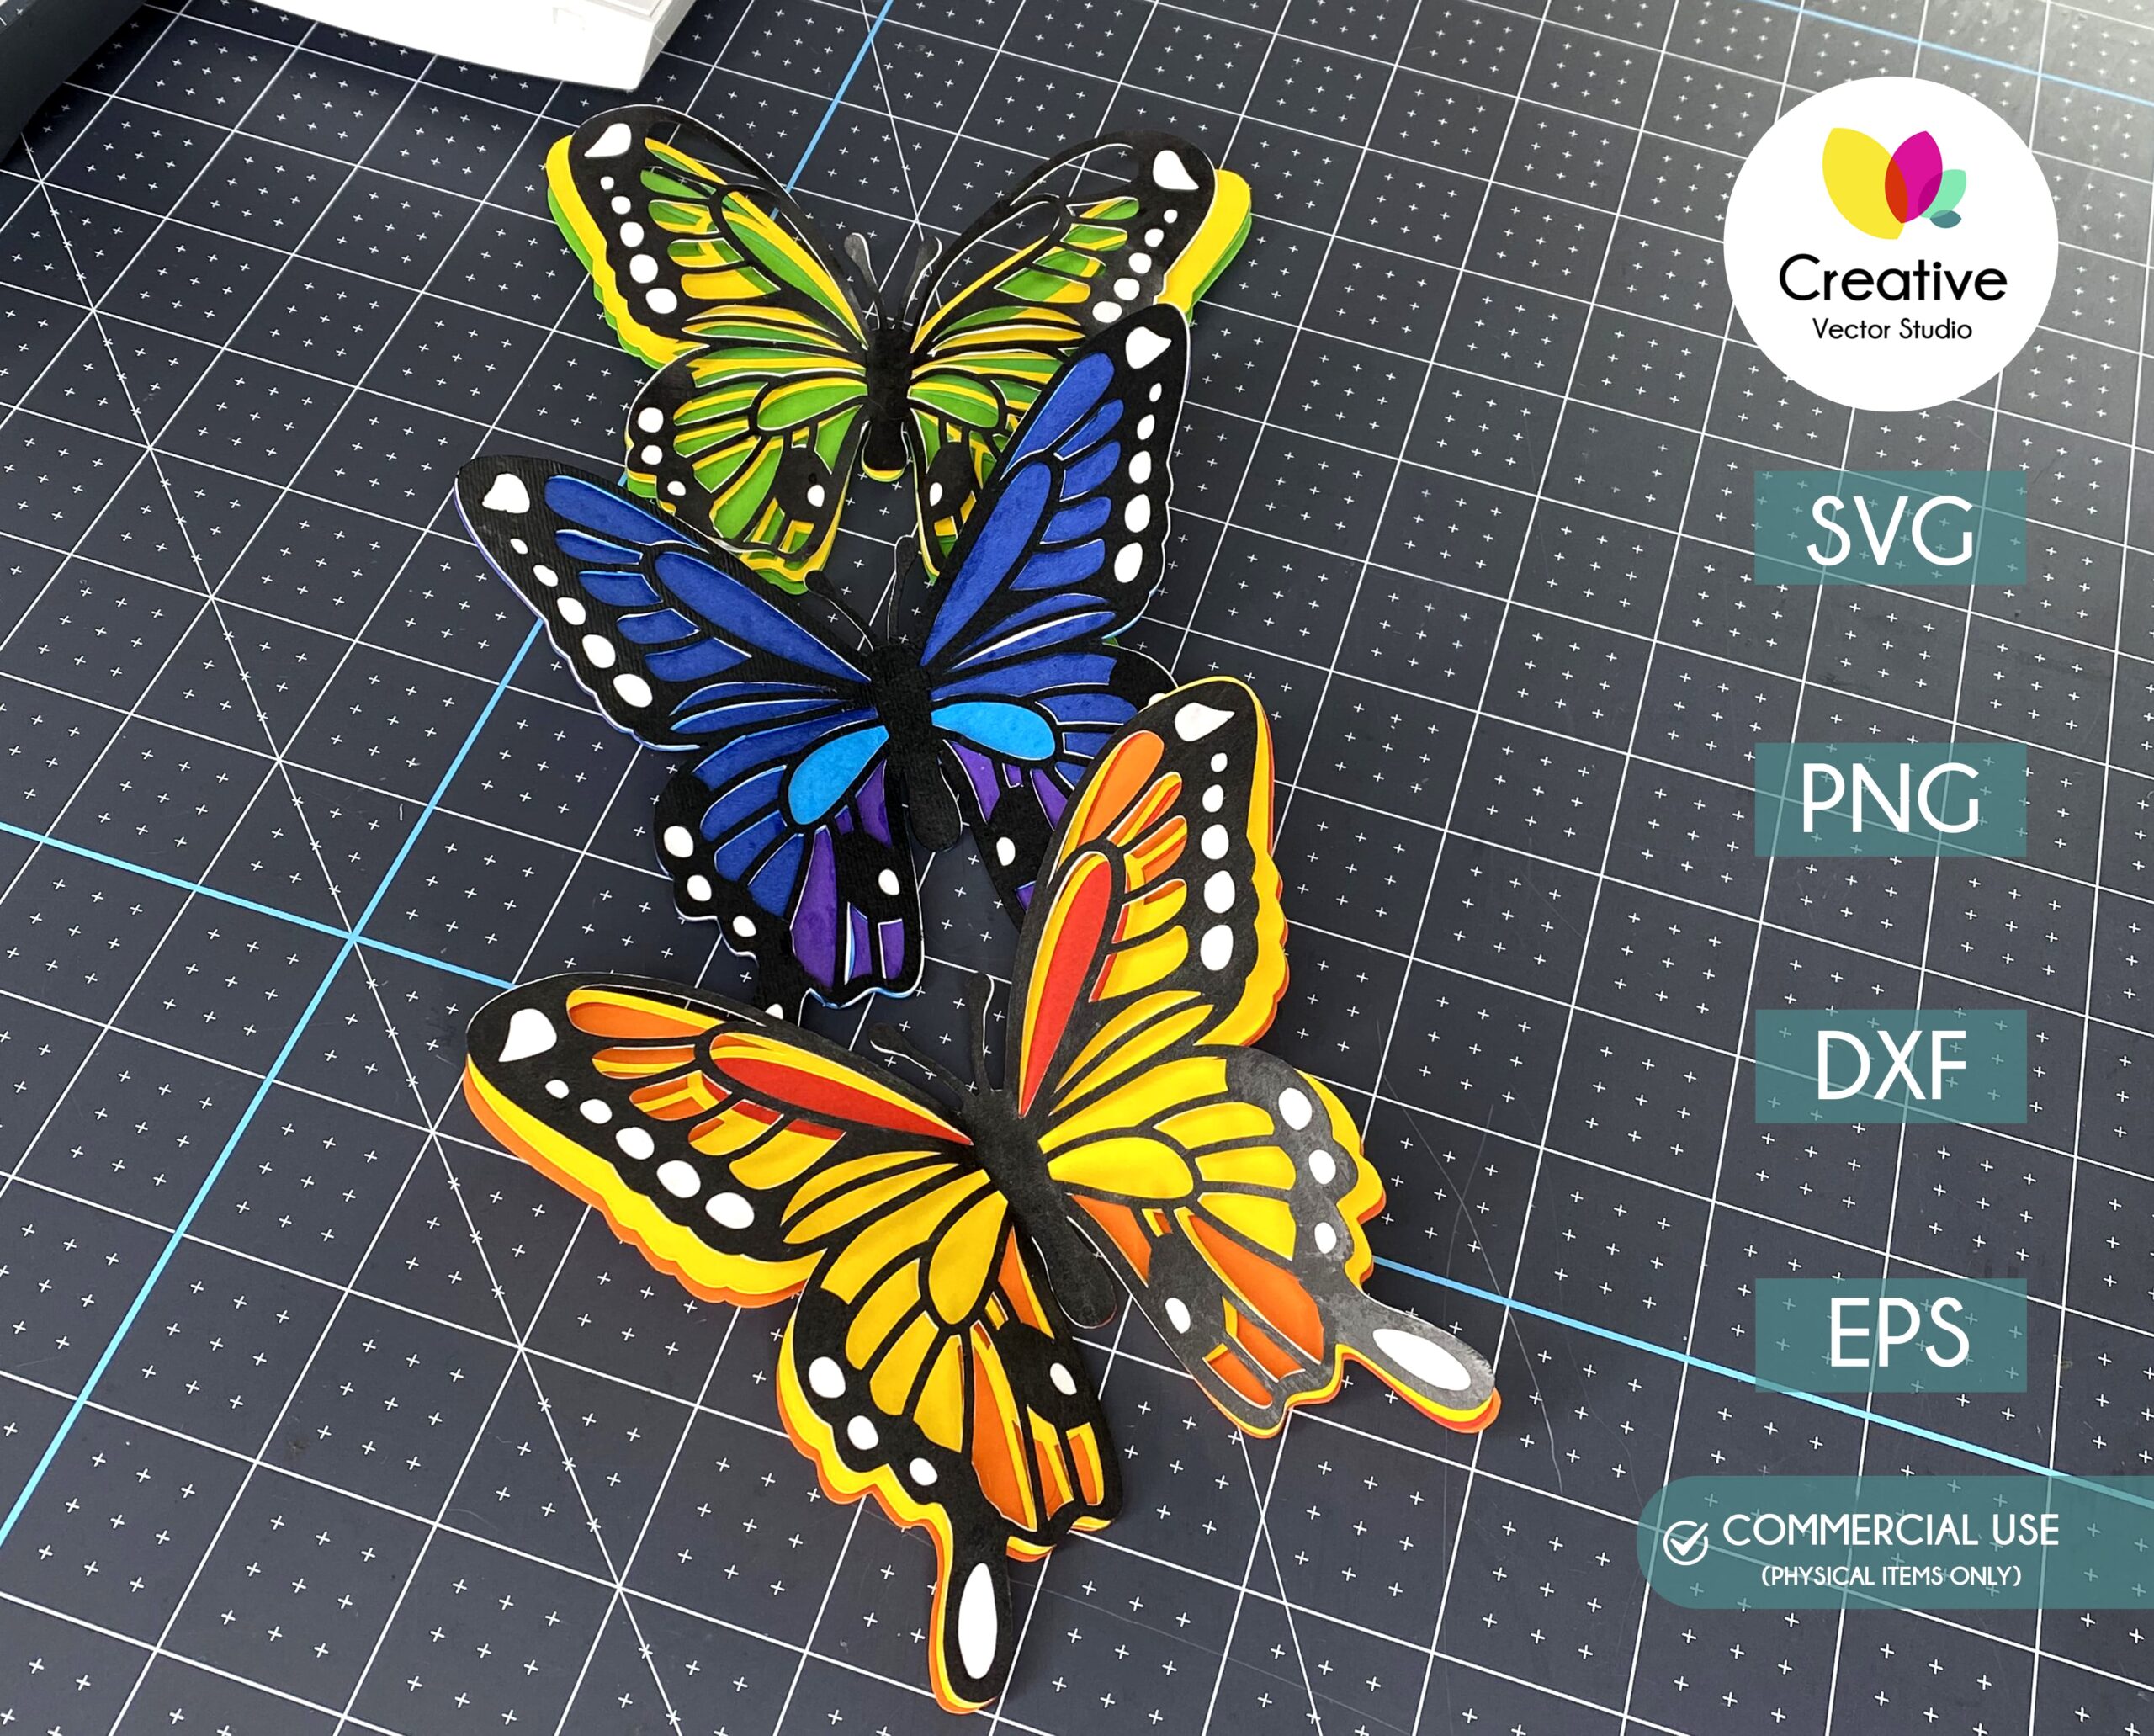 3D Butterfly SVG, PNG, DXF, EPS - Creative Vector Studio